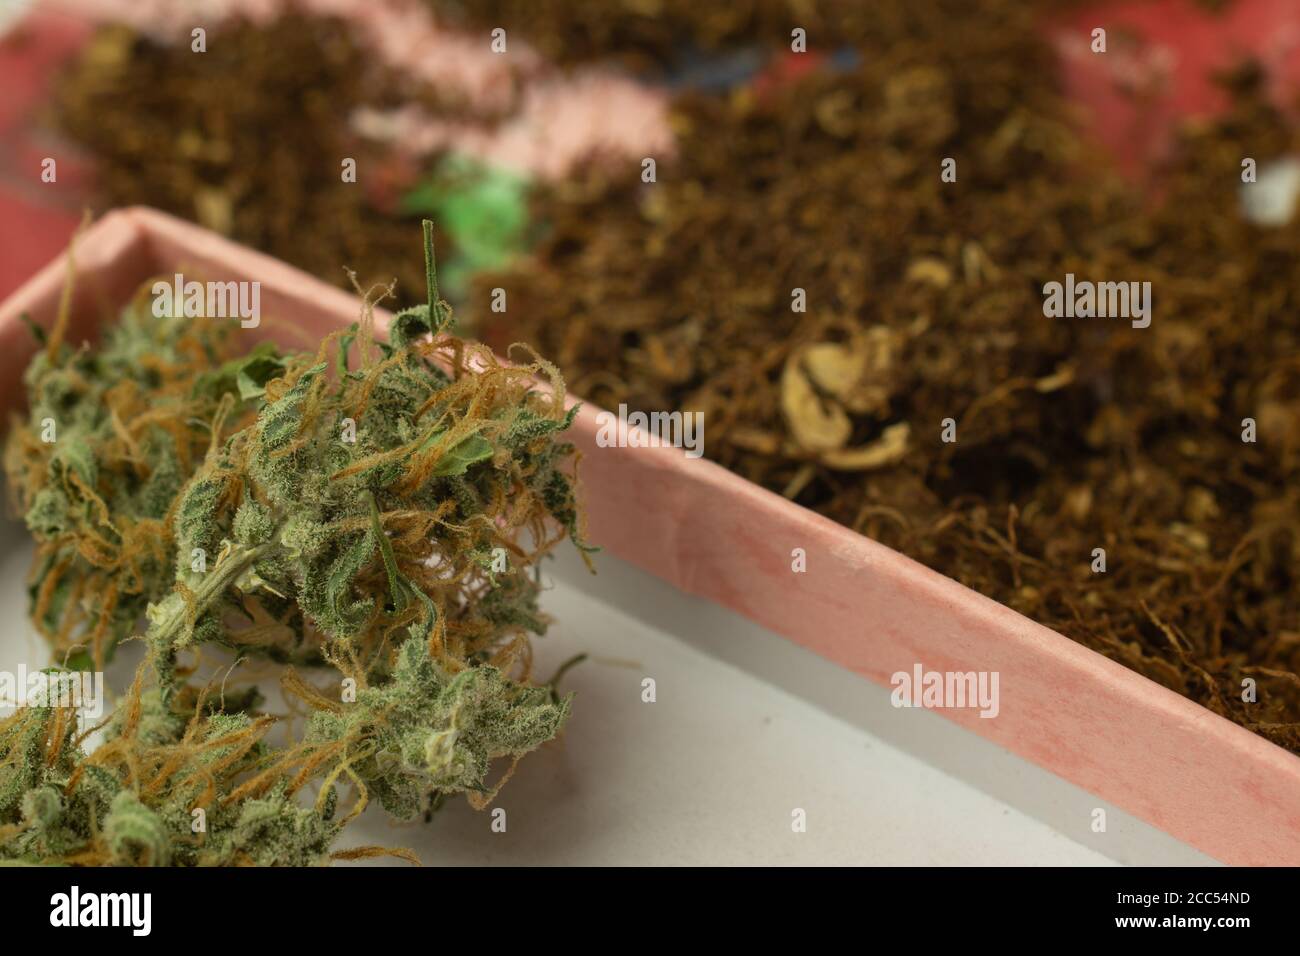 Cannabis buds versus tobacco for smoking Stock Photo